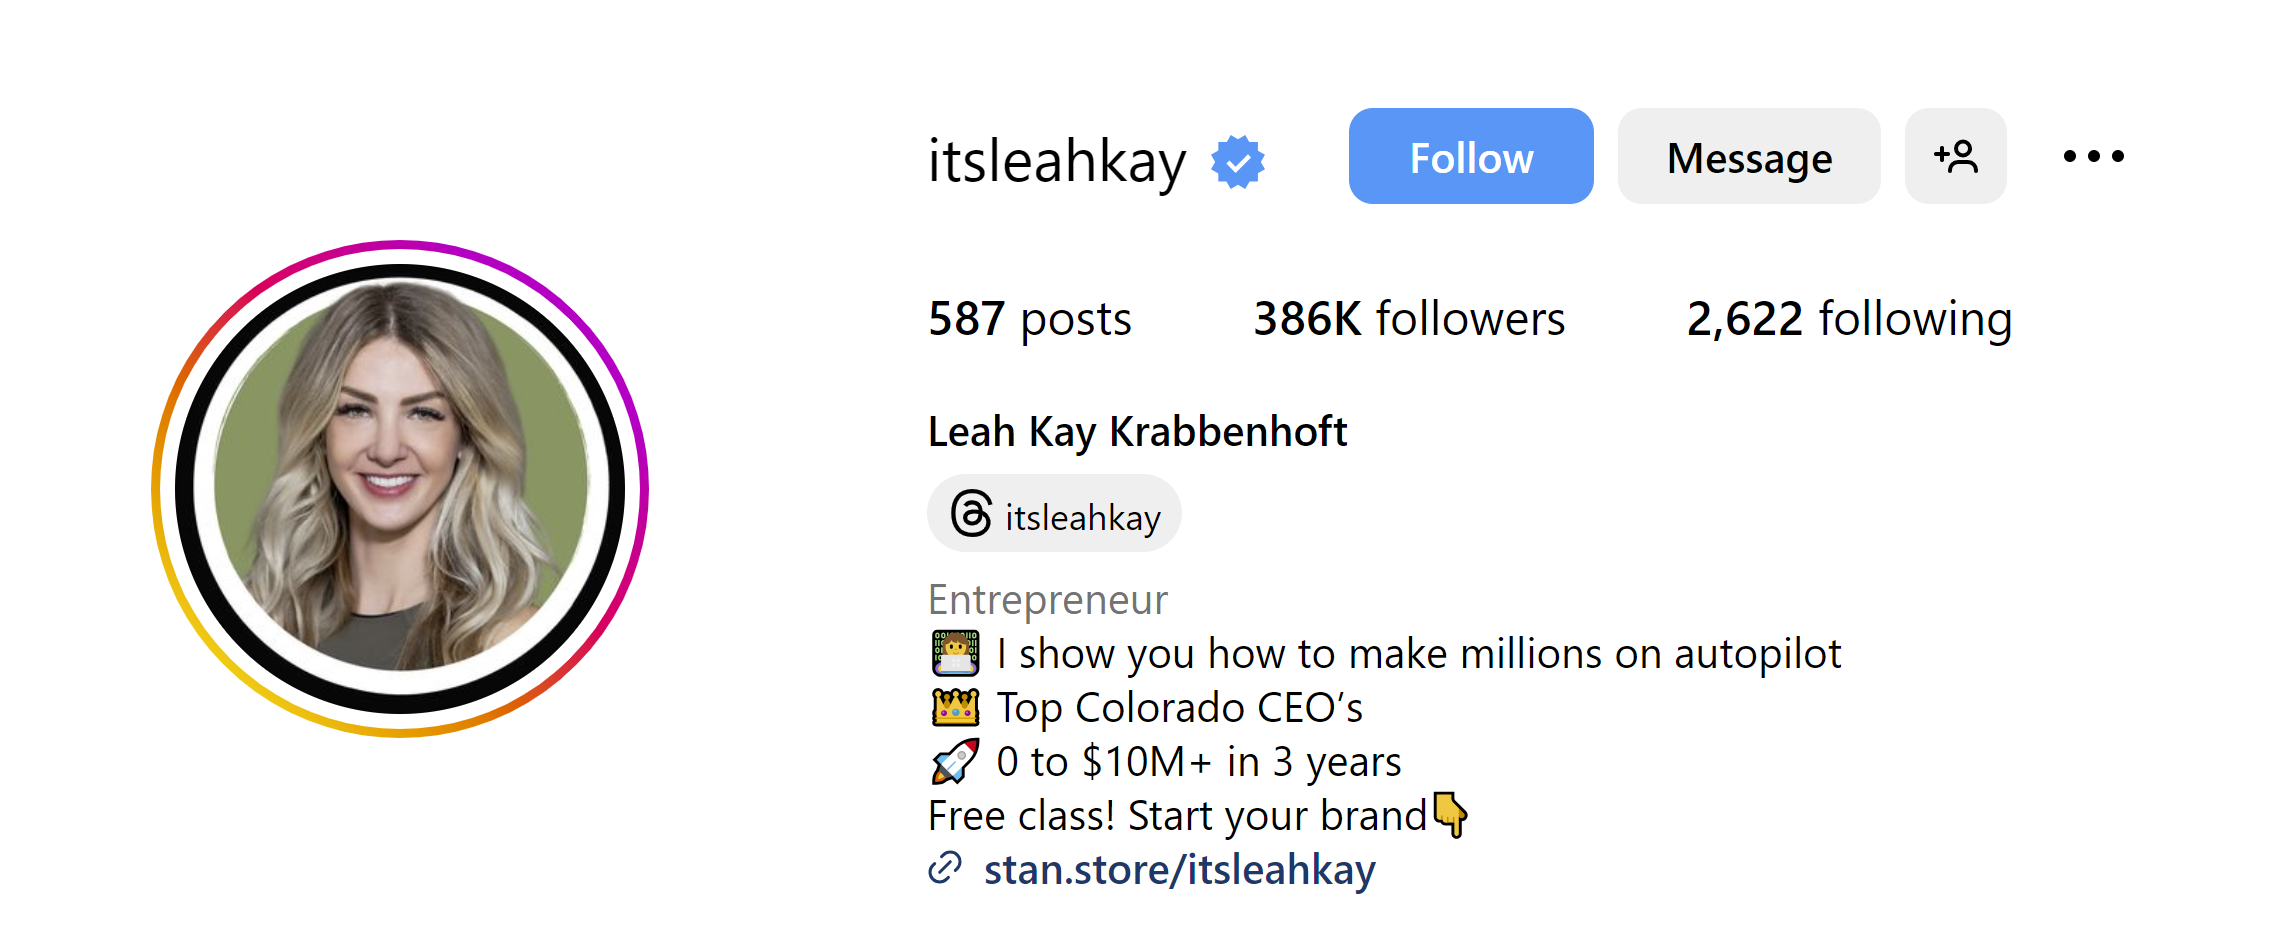 Who Is Leah Kay